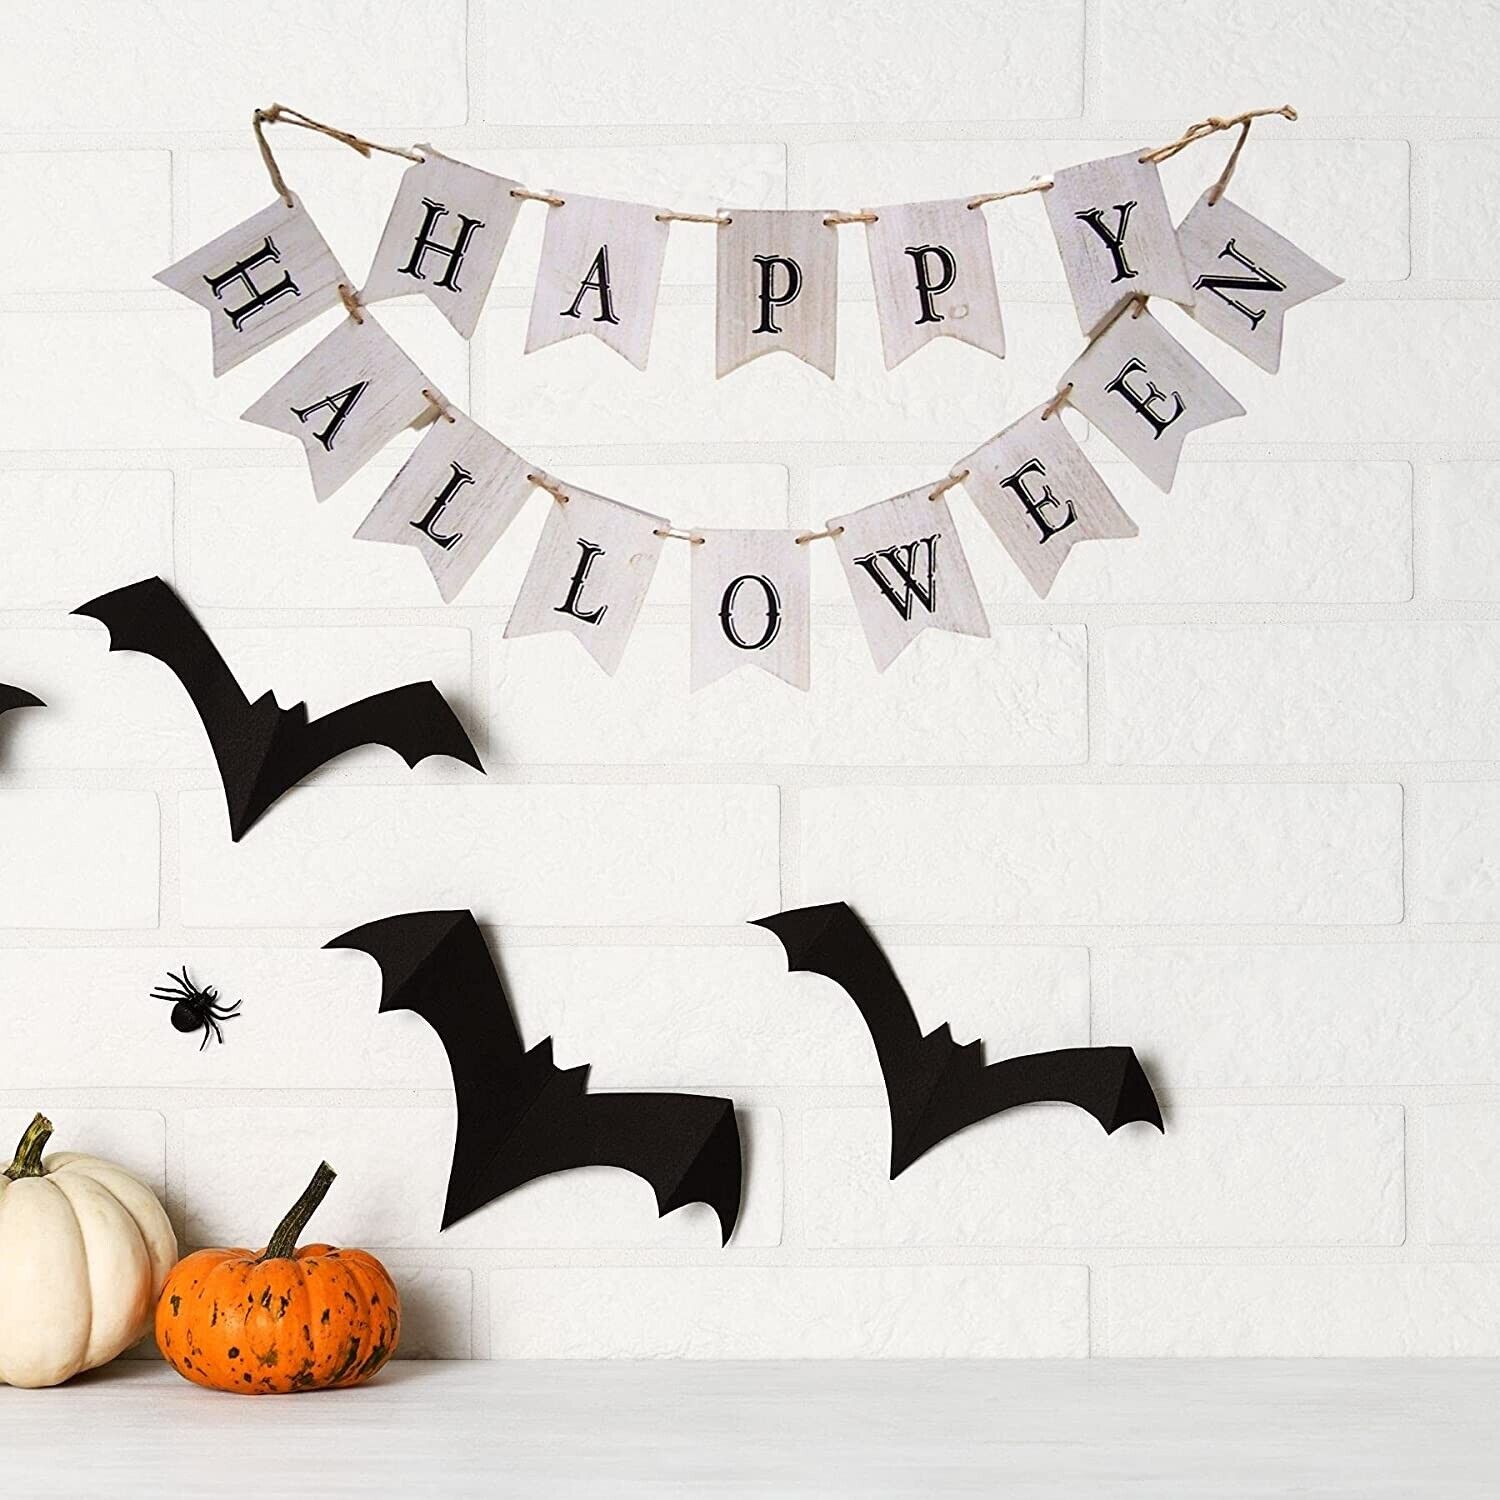 Rustic White Washed Wooden Happy Halloween Sign